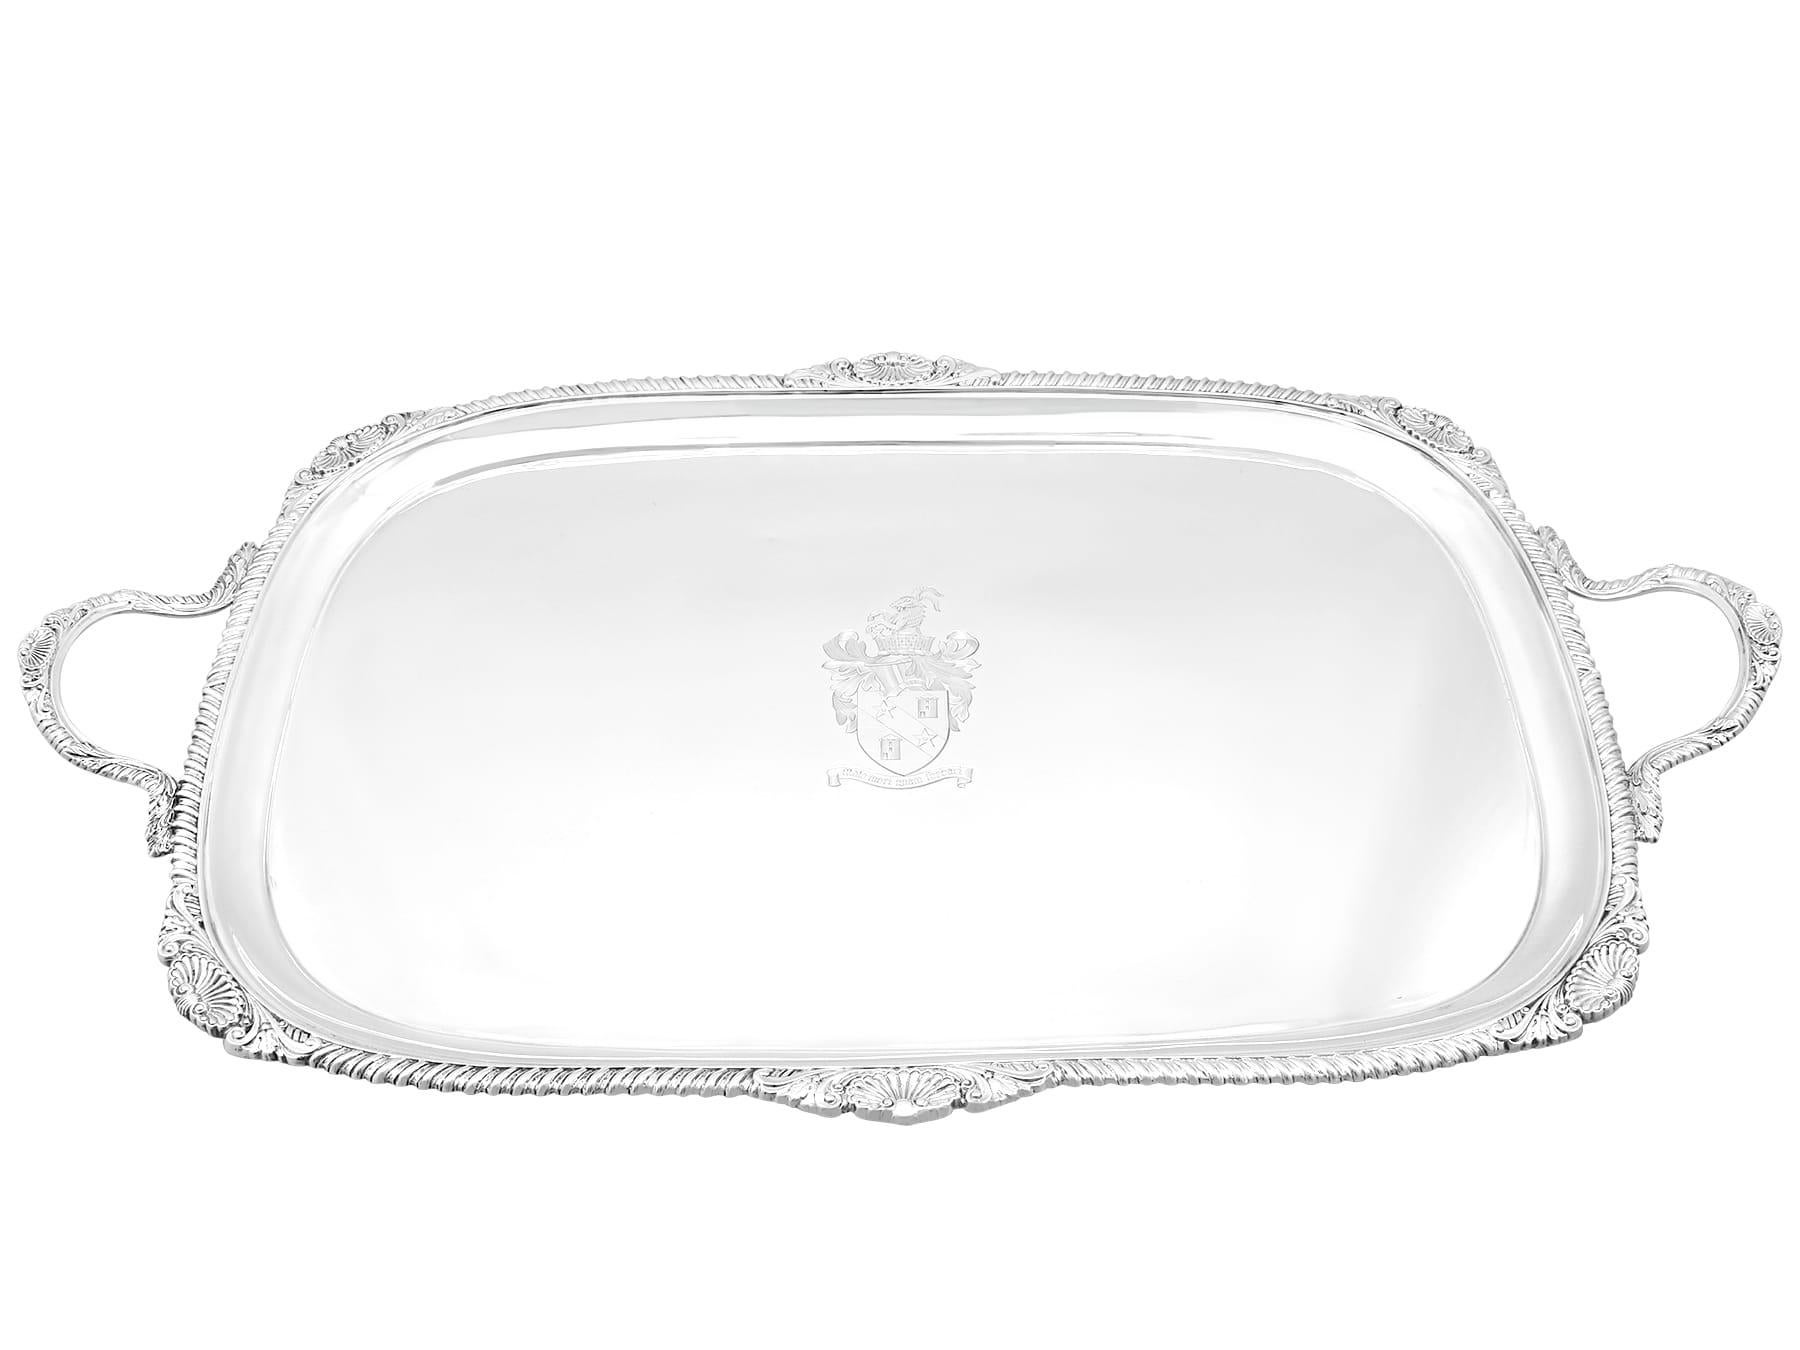 This magnificent antique Edwardian silver tray, in sterling standard, has a rectangular shaped form with rounded corners.

The surface of this sterling silver serving tray is embellished with an exceptional and impressive contemporary bright cut